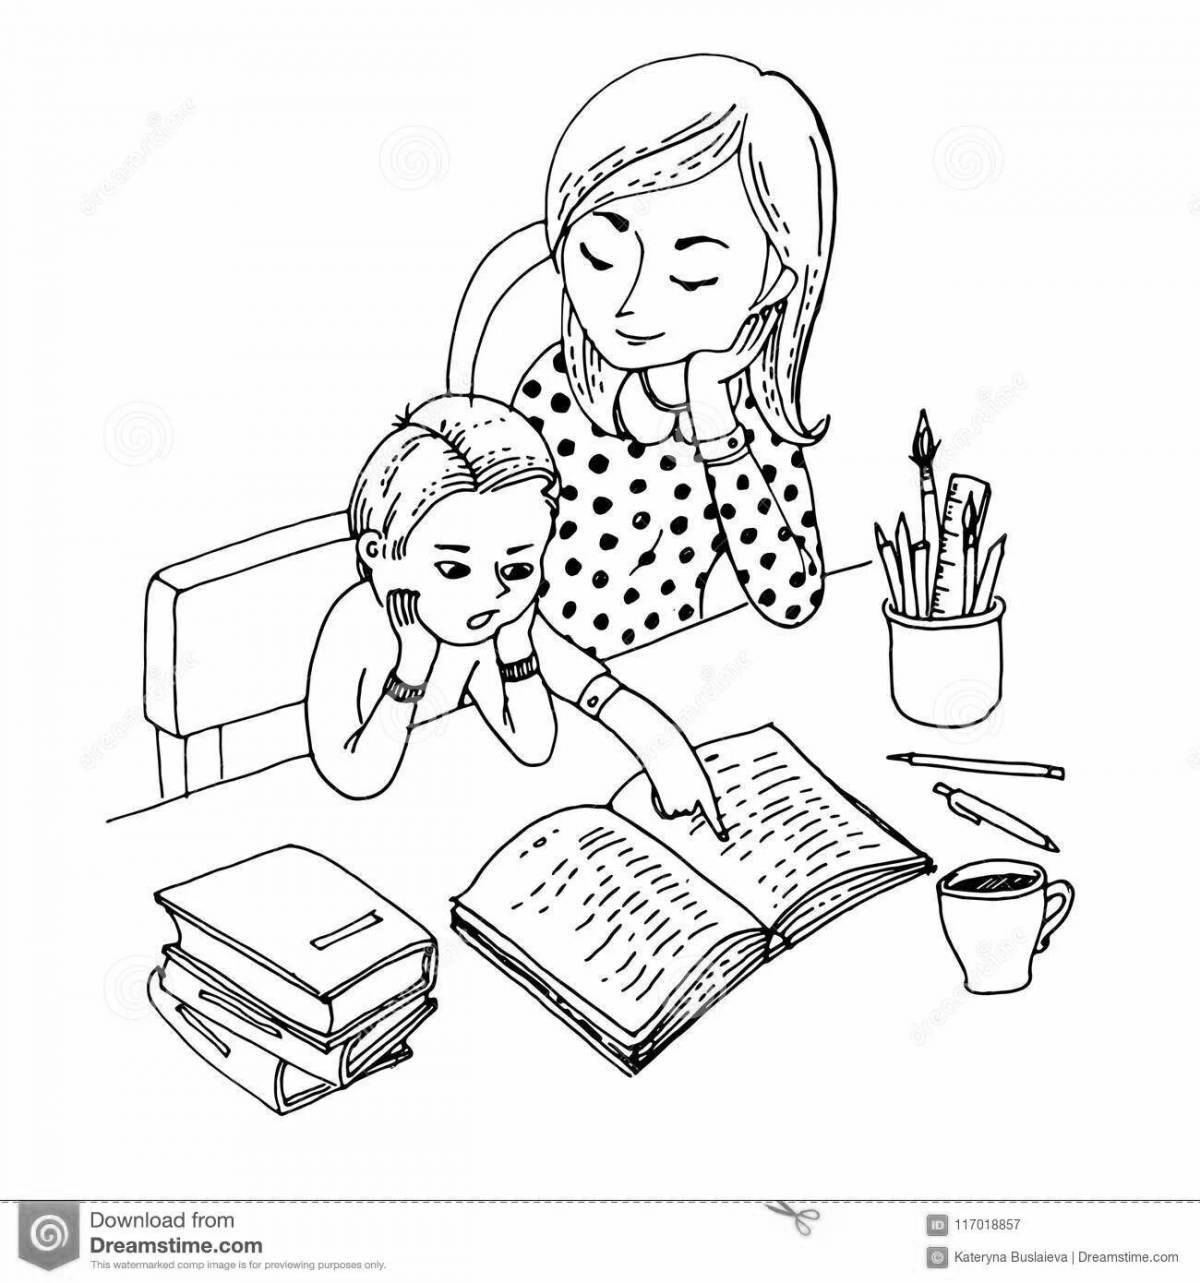 Relaxing coloring book to help parents